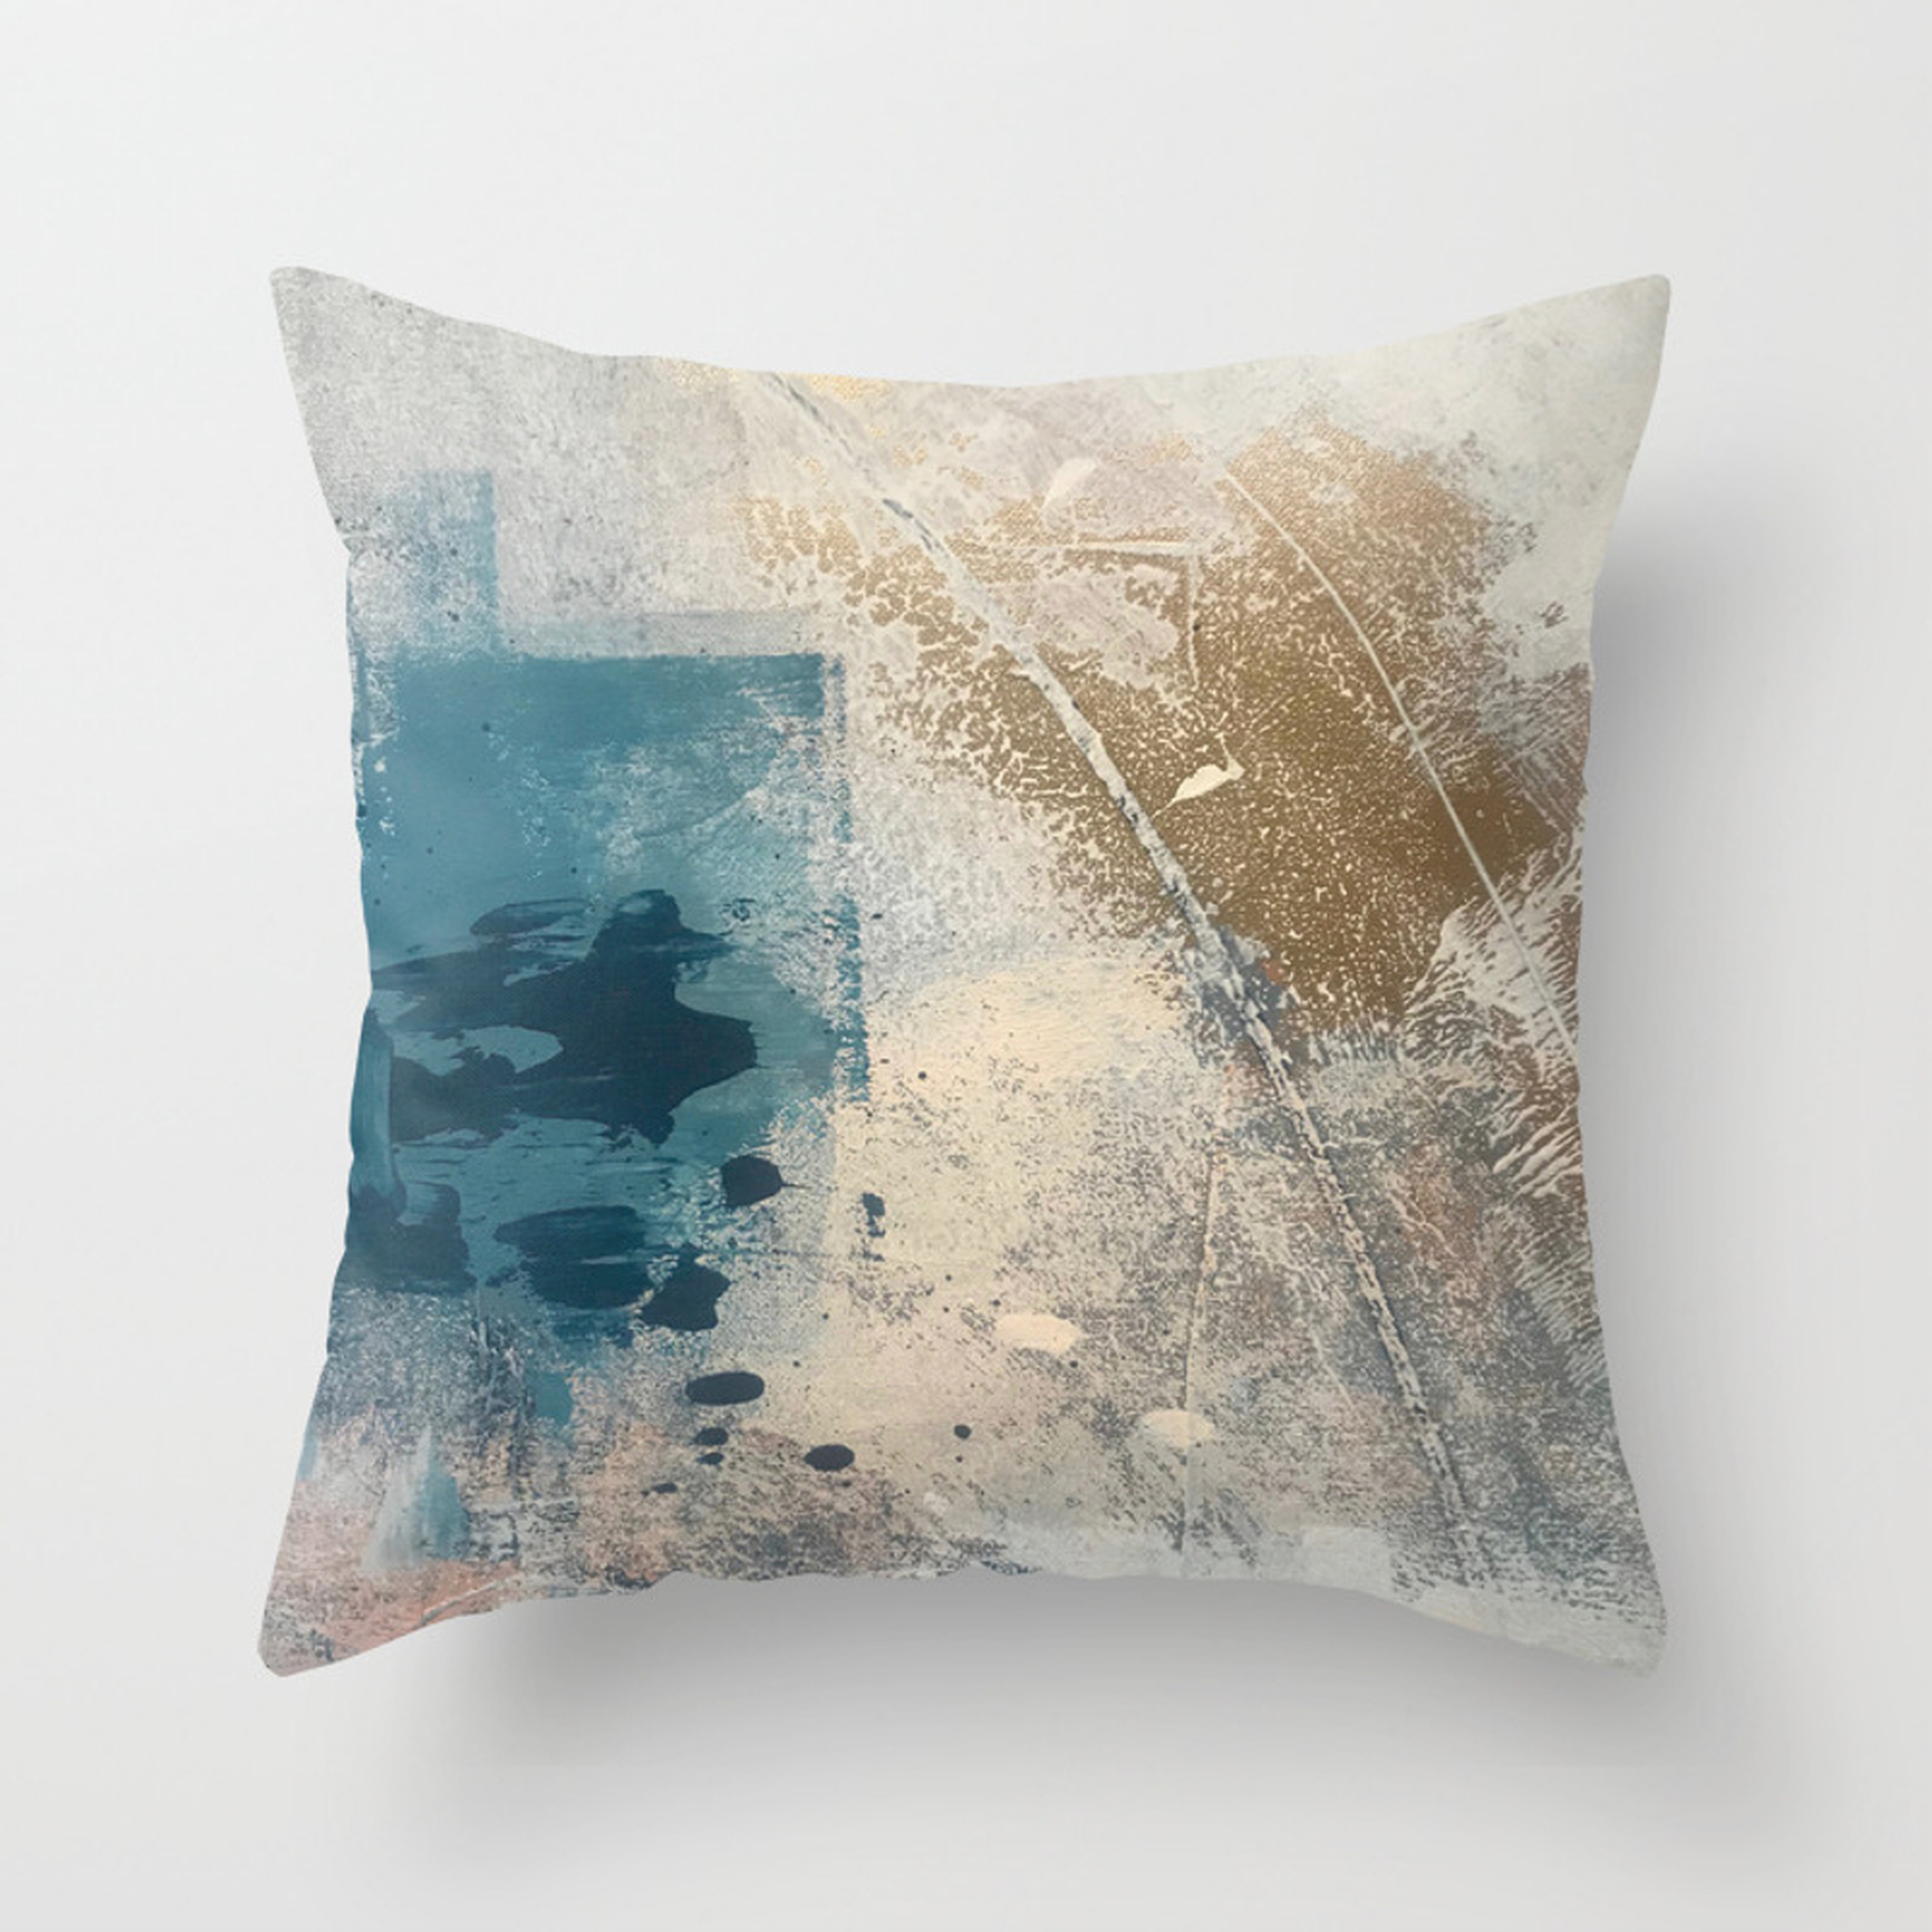 Embrace: A Minimal, Abstract Mixed-media Piece In Blues And Gold With A Hint Of Pink Throw Pillow by Alyssa Hamilton Art - Cover (18" x 18") With Pillow Insert - Indoor Pillow - Society6